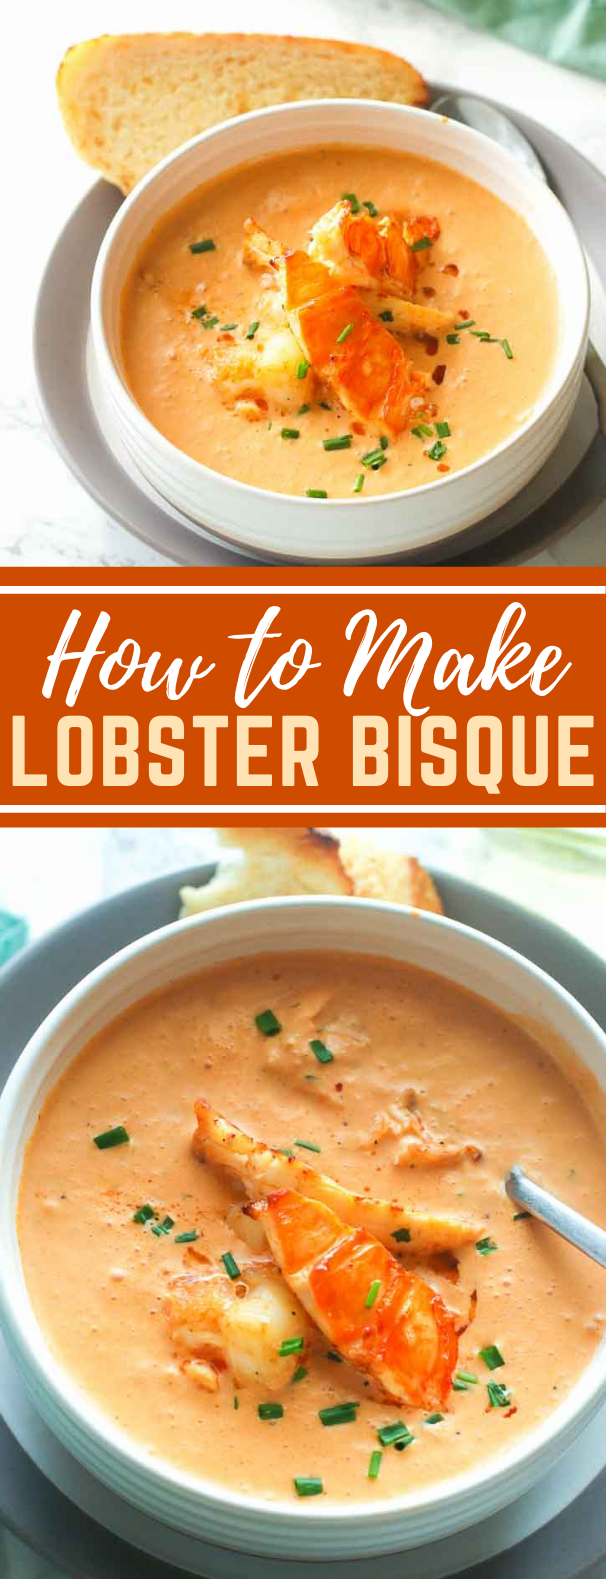 Lobster Bisque #appetizers #lunch #dinner #seafood #recipes